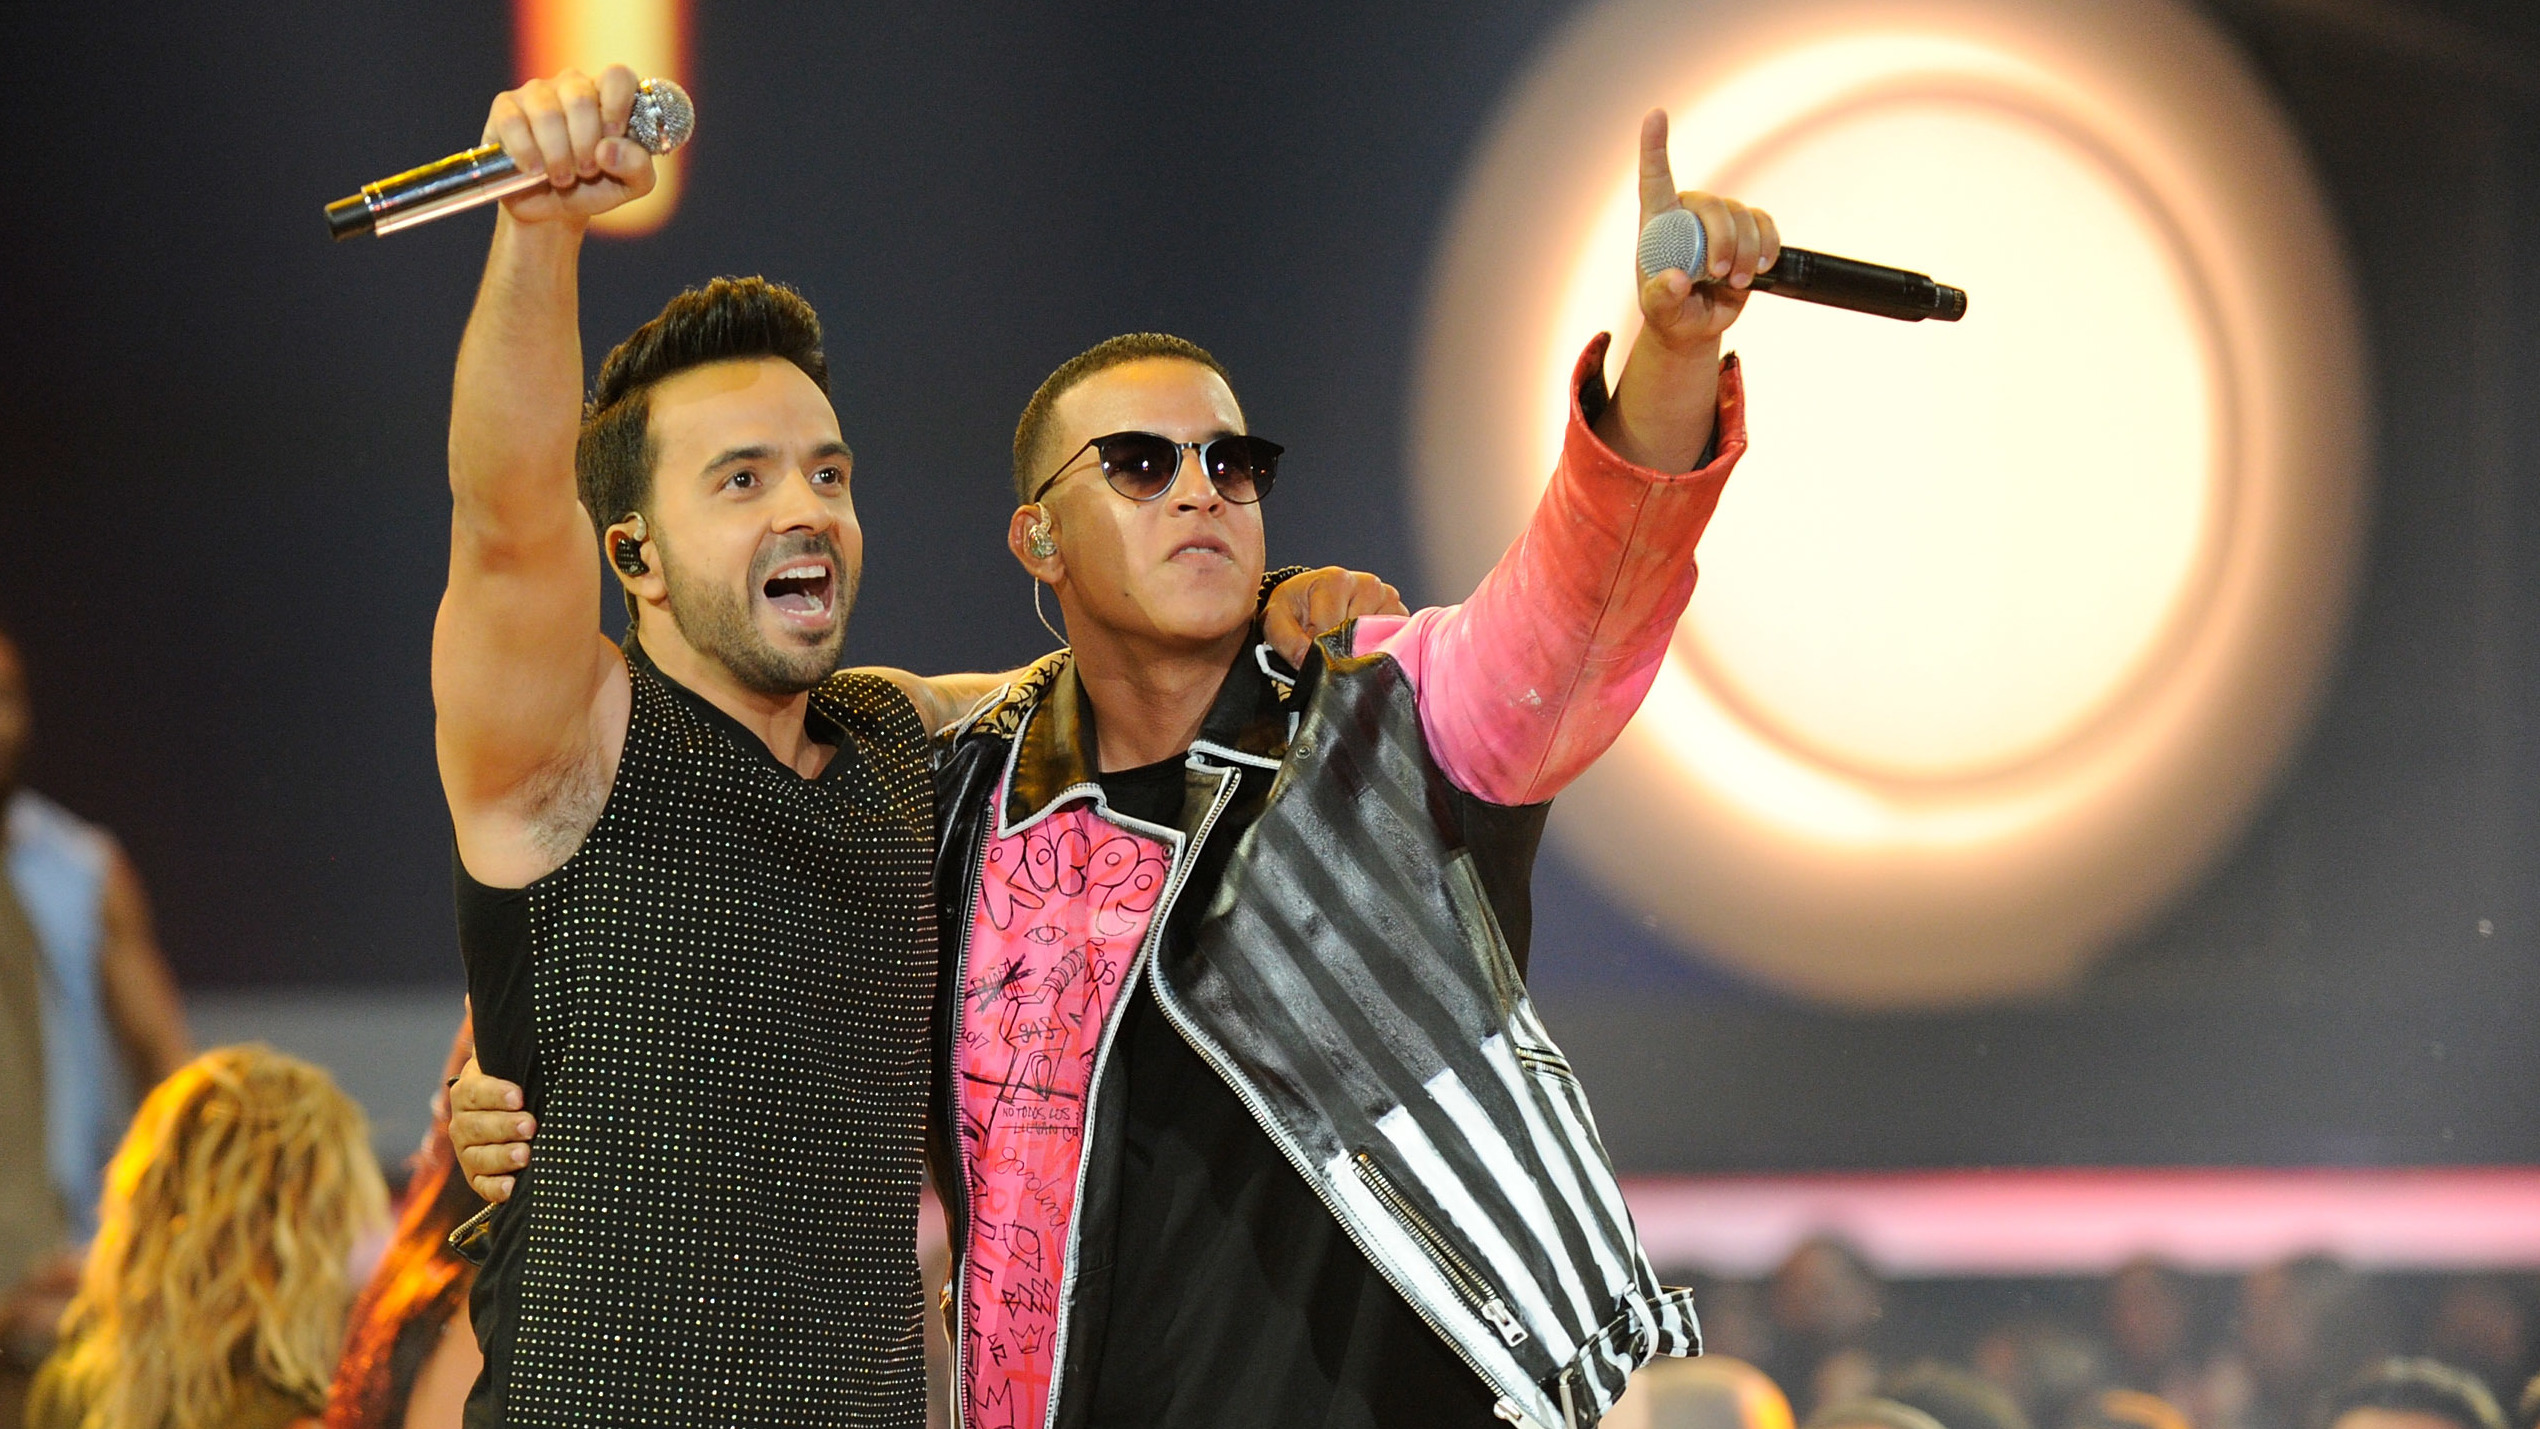 Luis Fonsi and Daddy Yankee performing "Despacito"